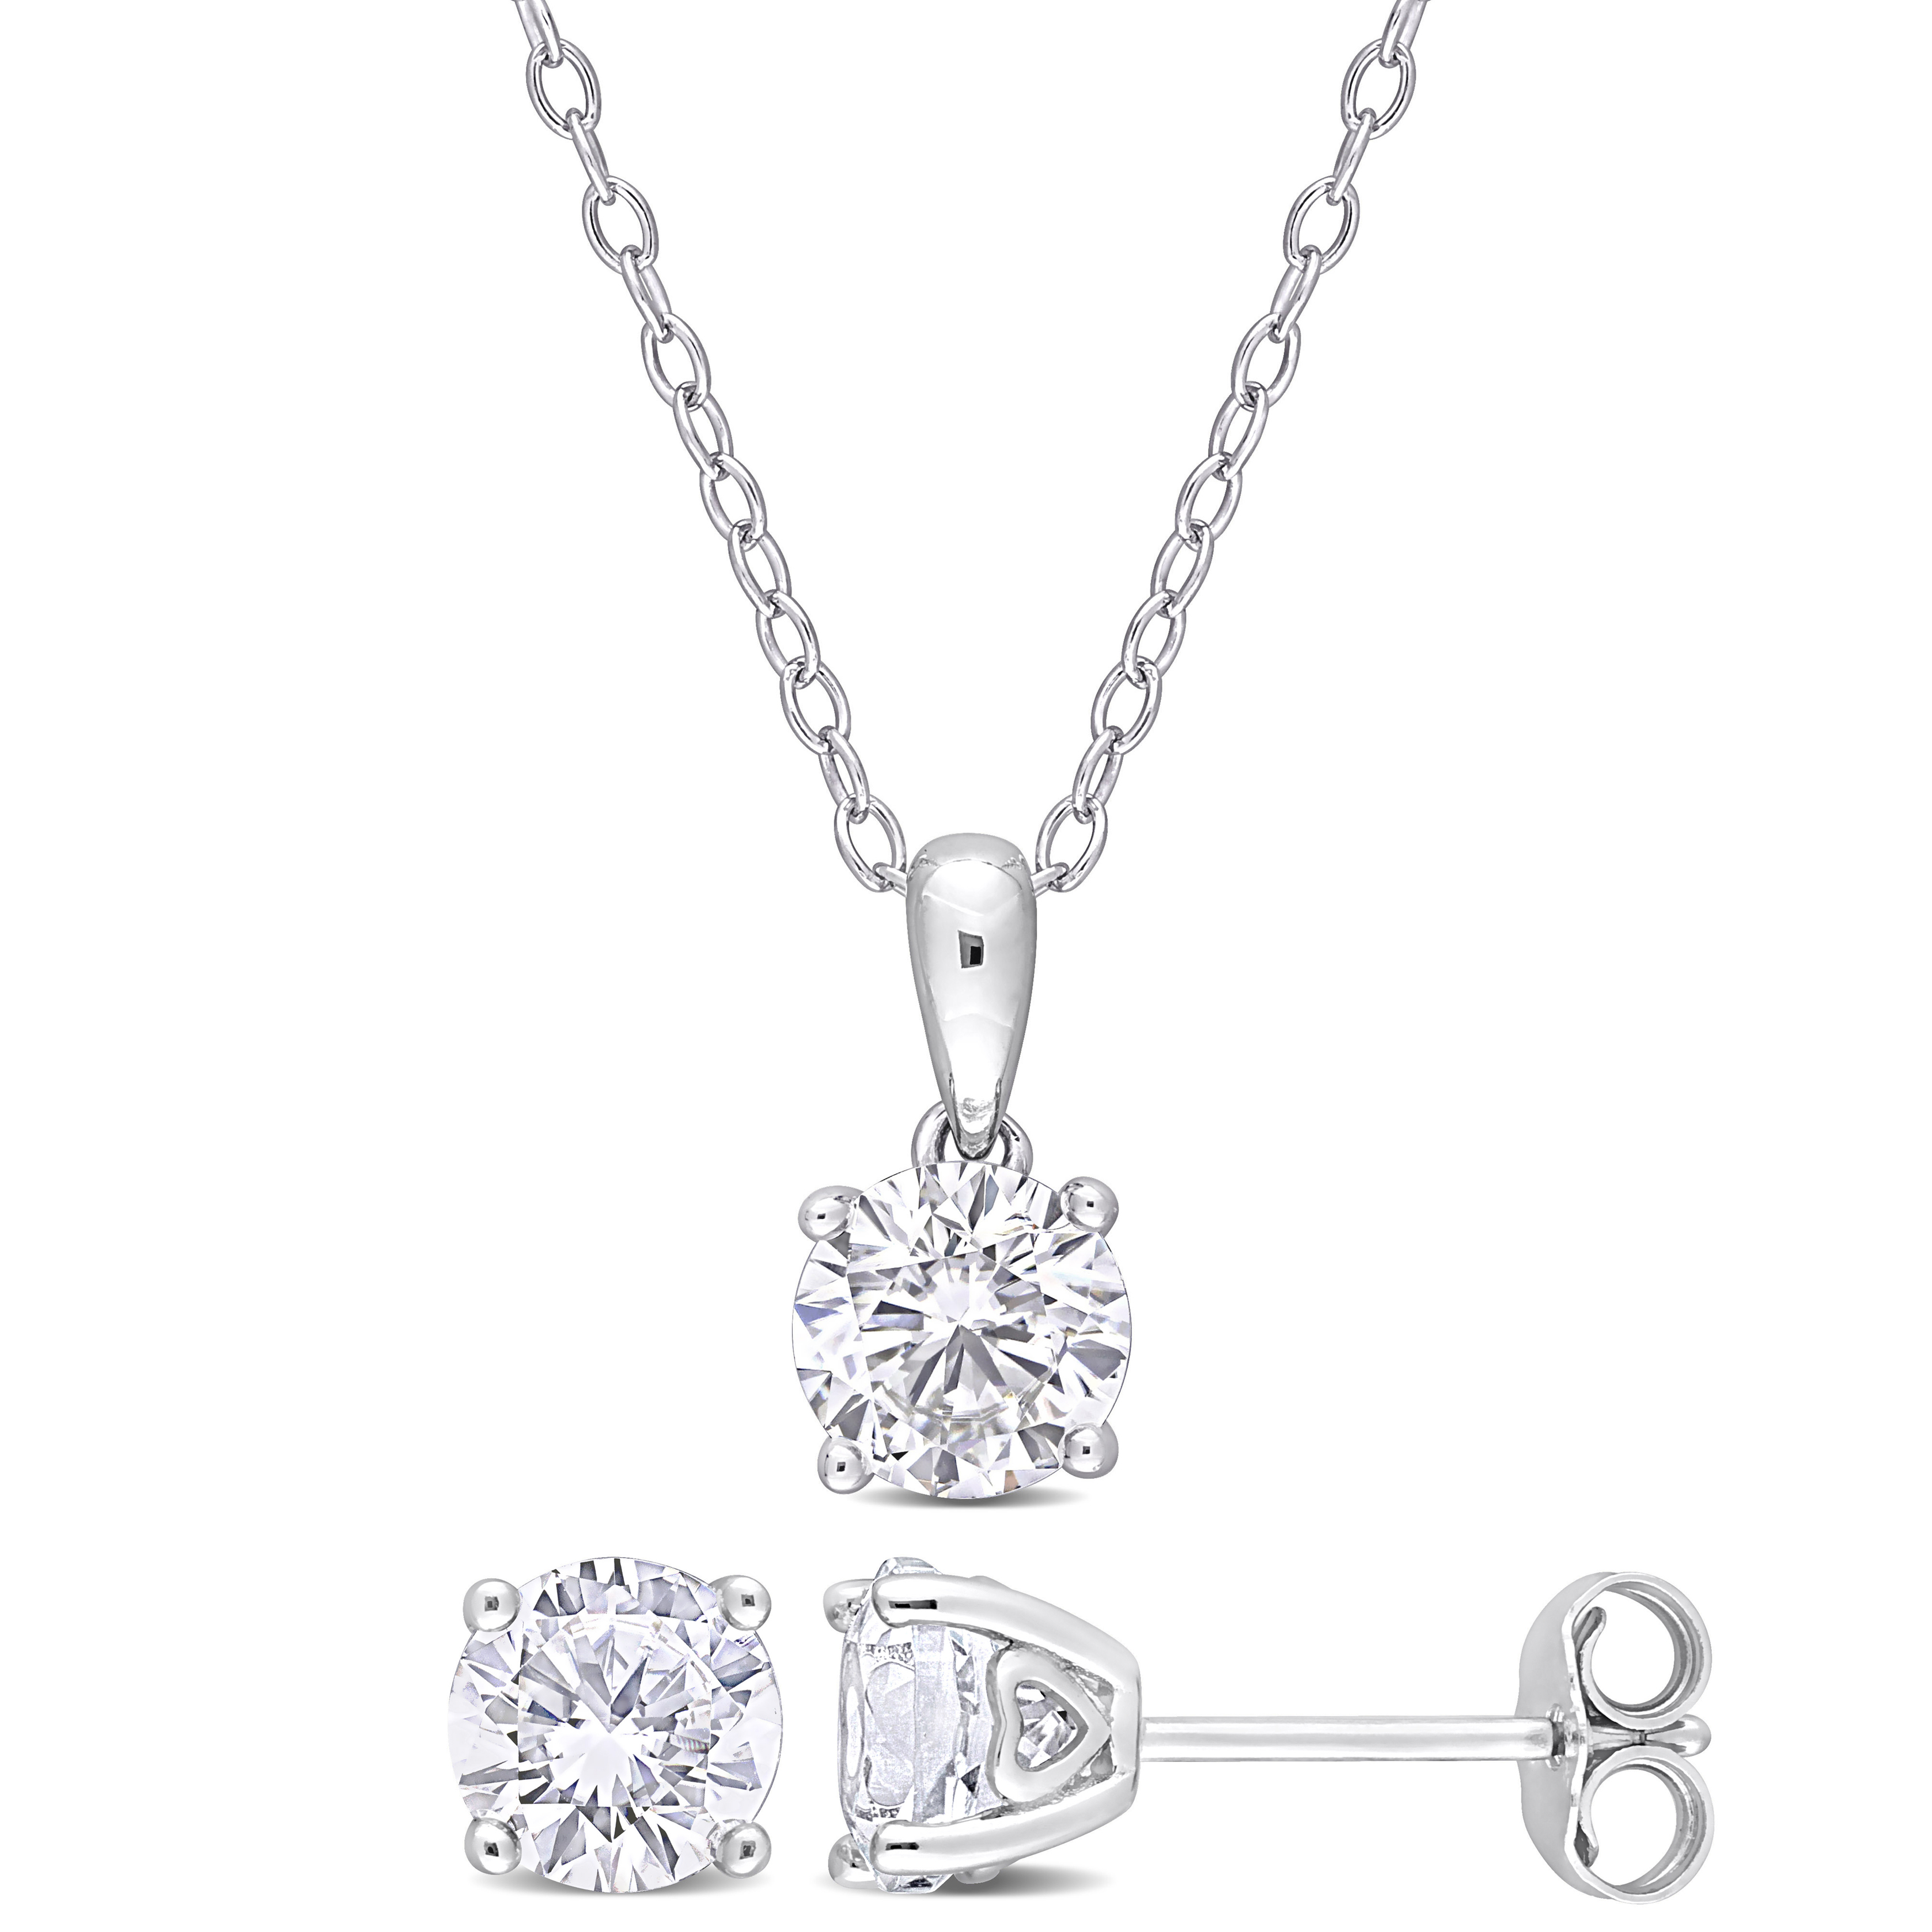 3 CT TGW Created White Sapphire 2-Piece Solitaire Pendant with Chain and Stud Earrings Set in Sterling Silver